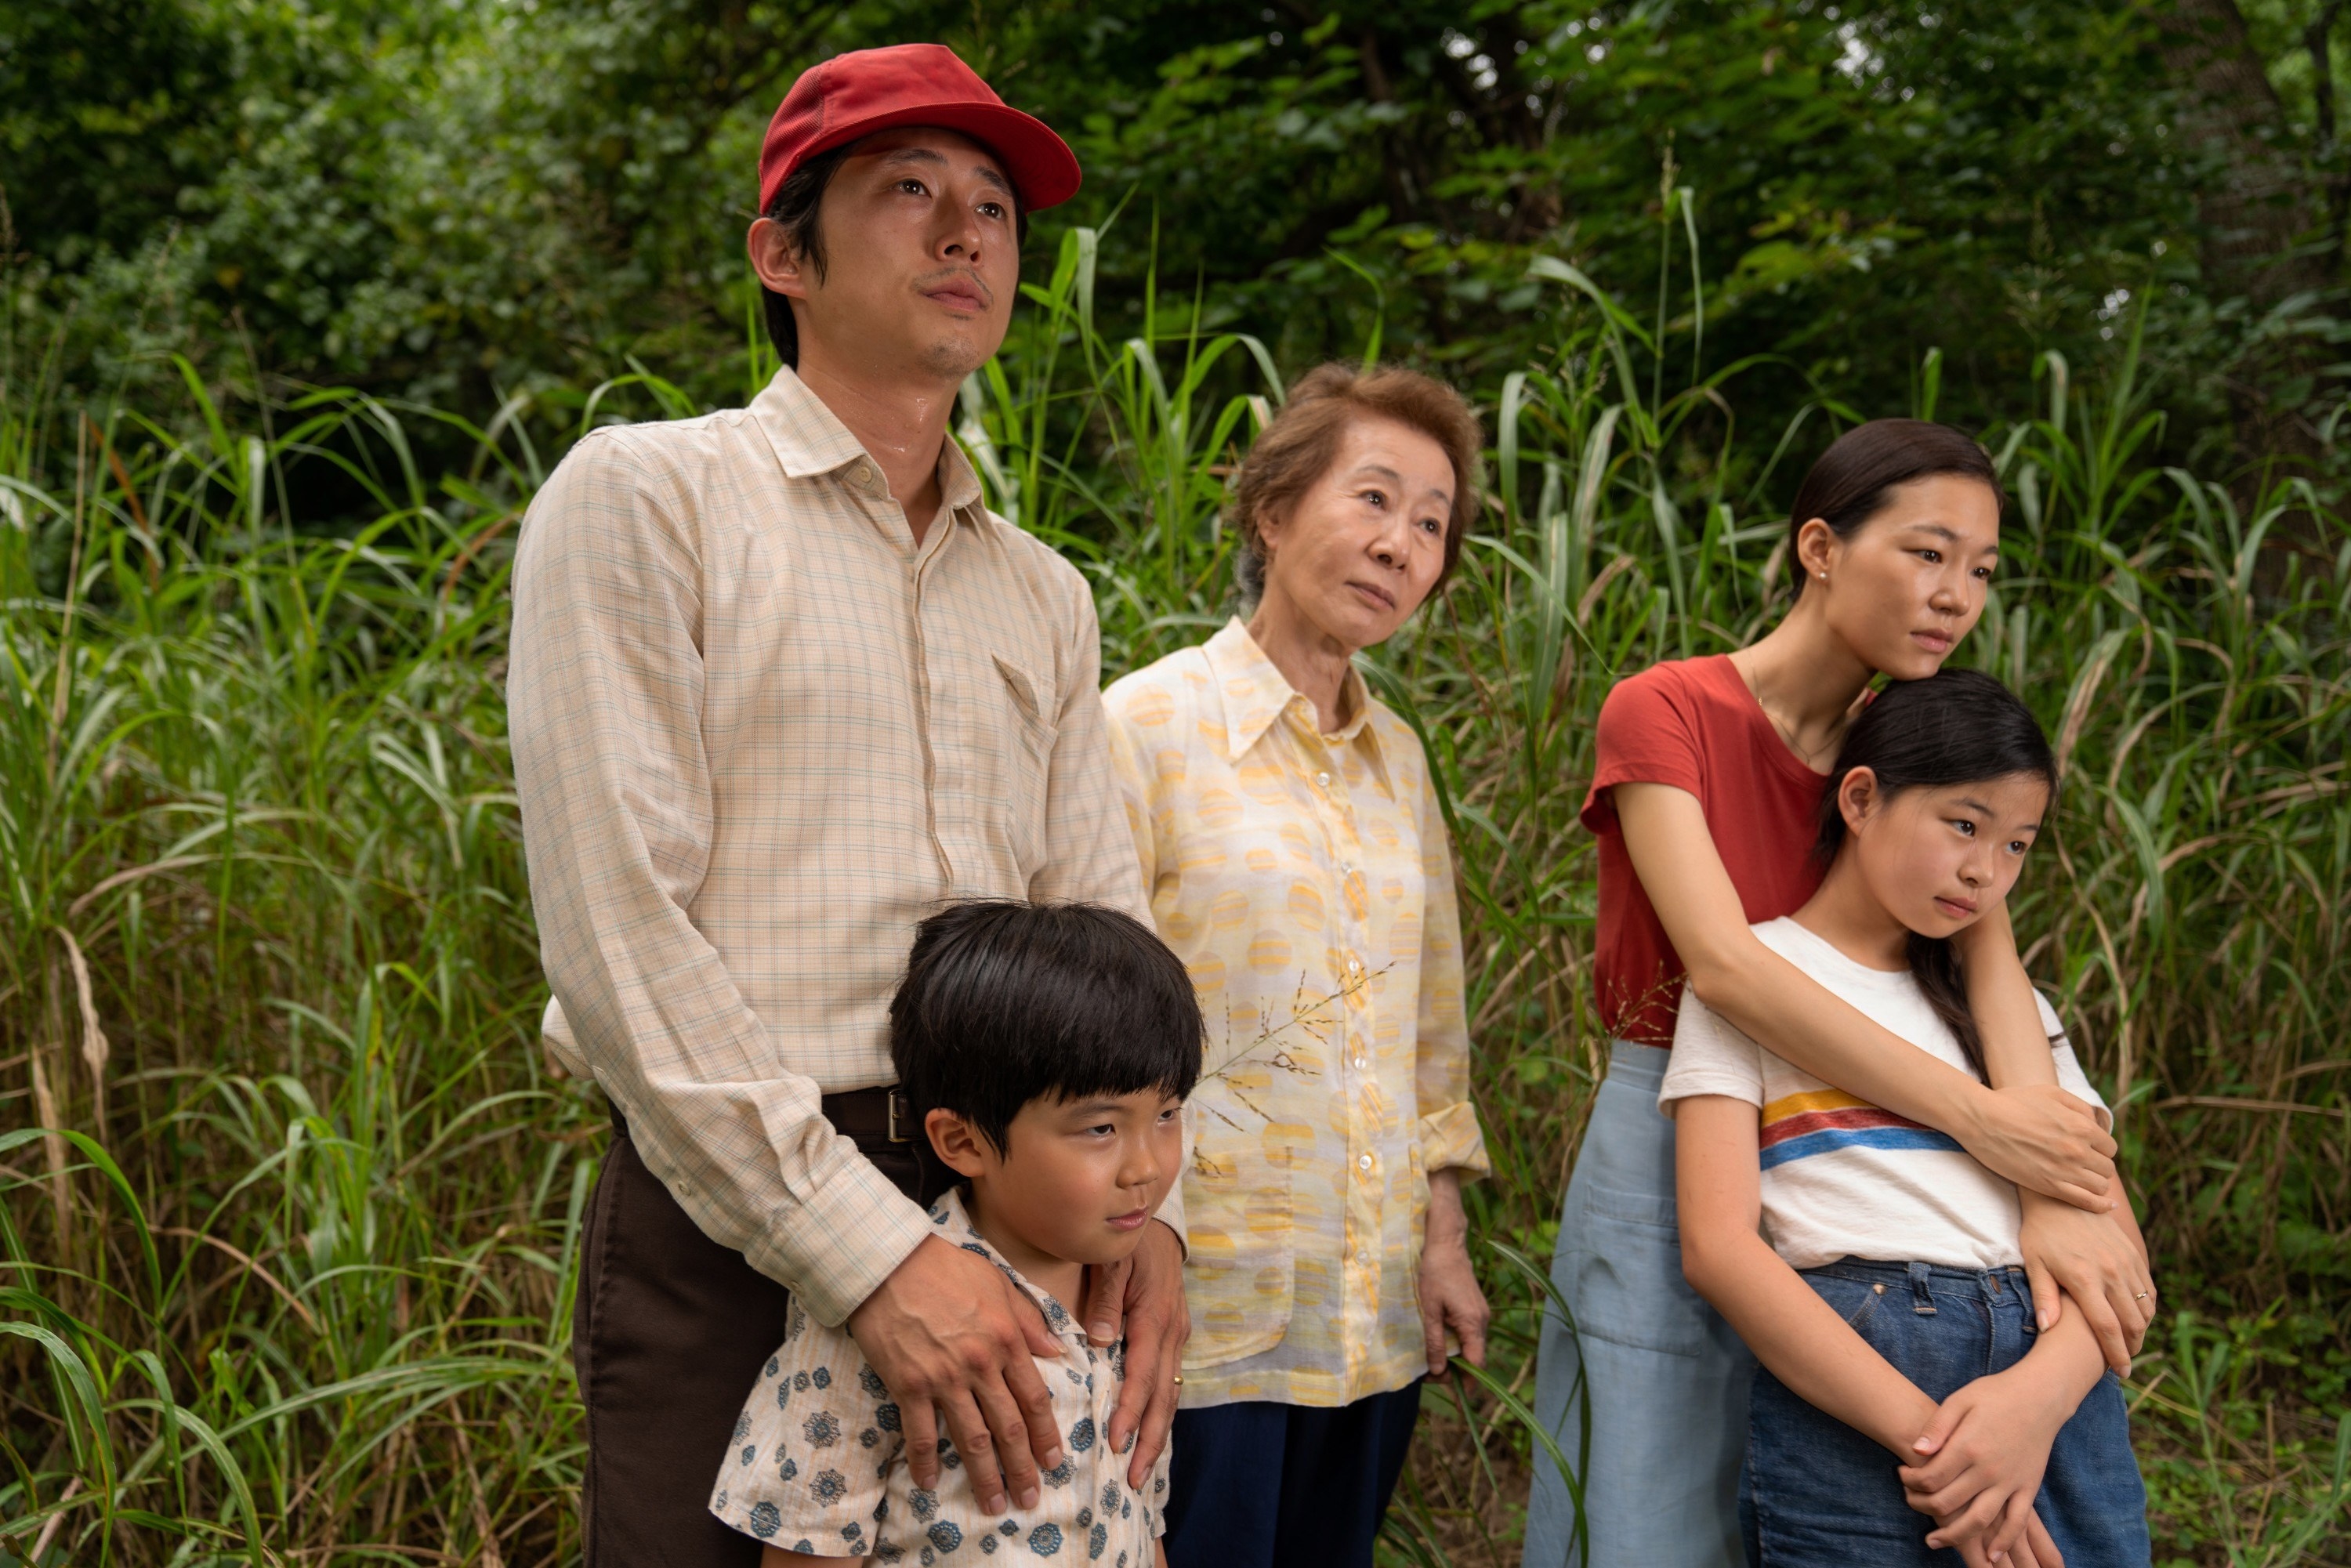 Steven Yeun, Alan S. Kim, Youn Yuh-Jung, Han Yeri, and Noel Cho stand outside in a field